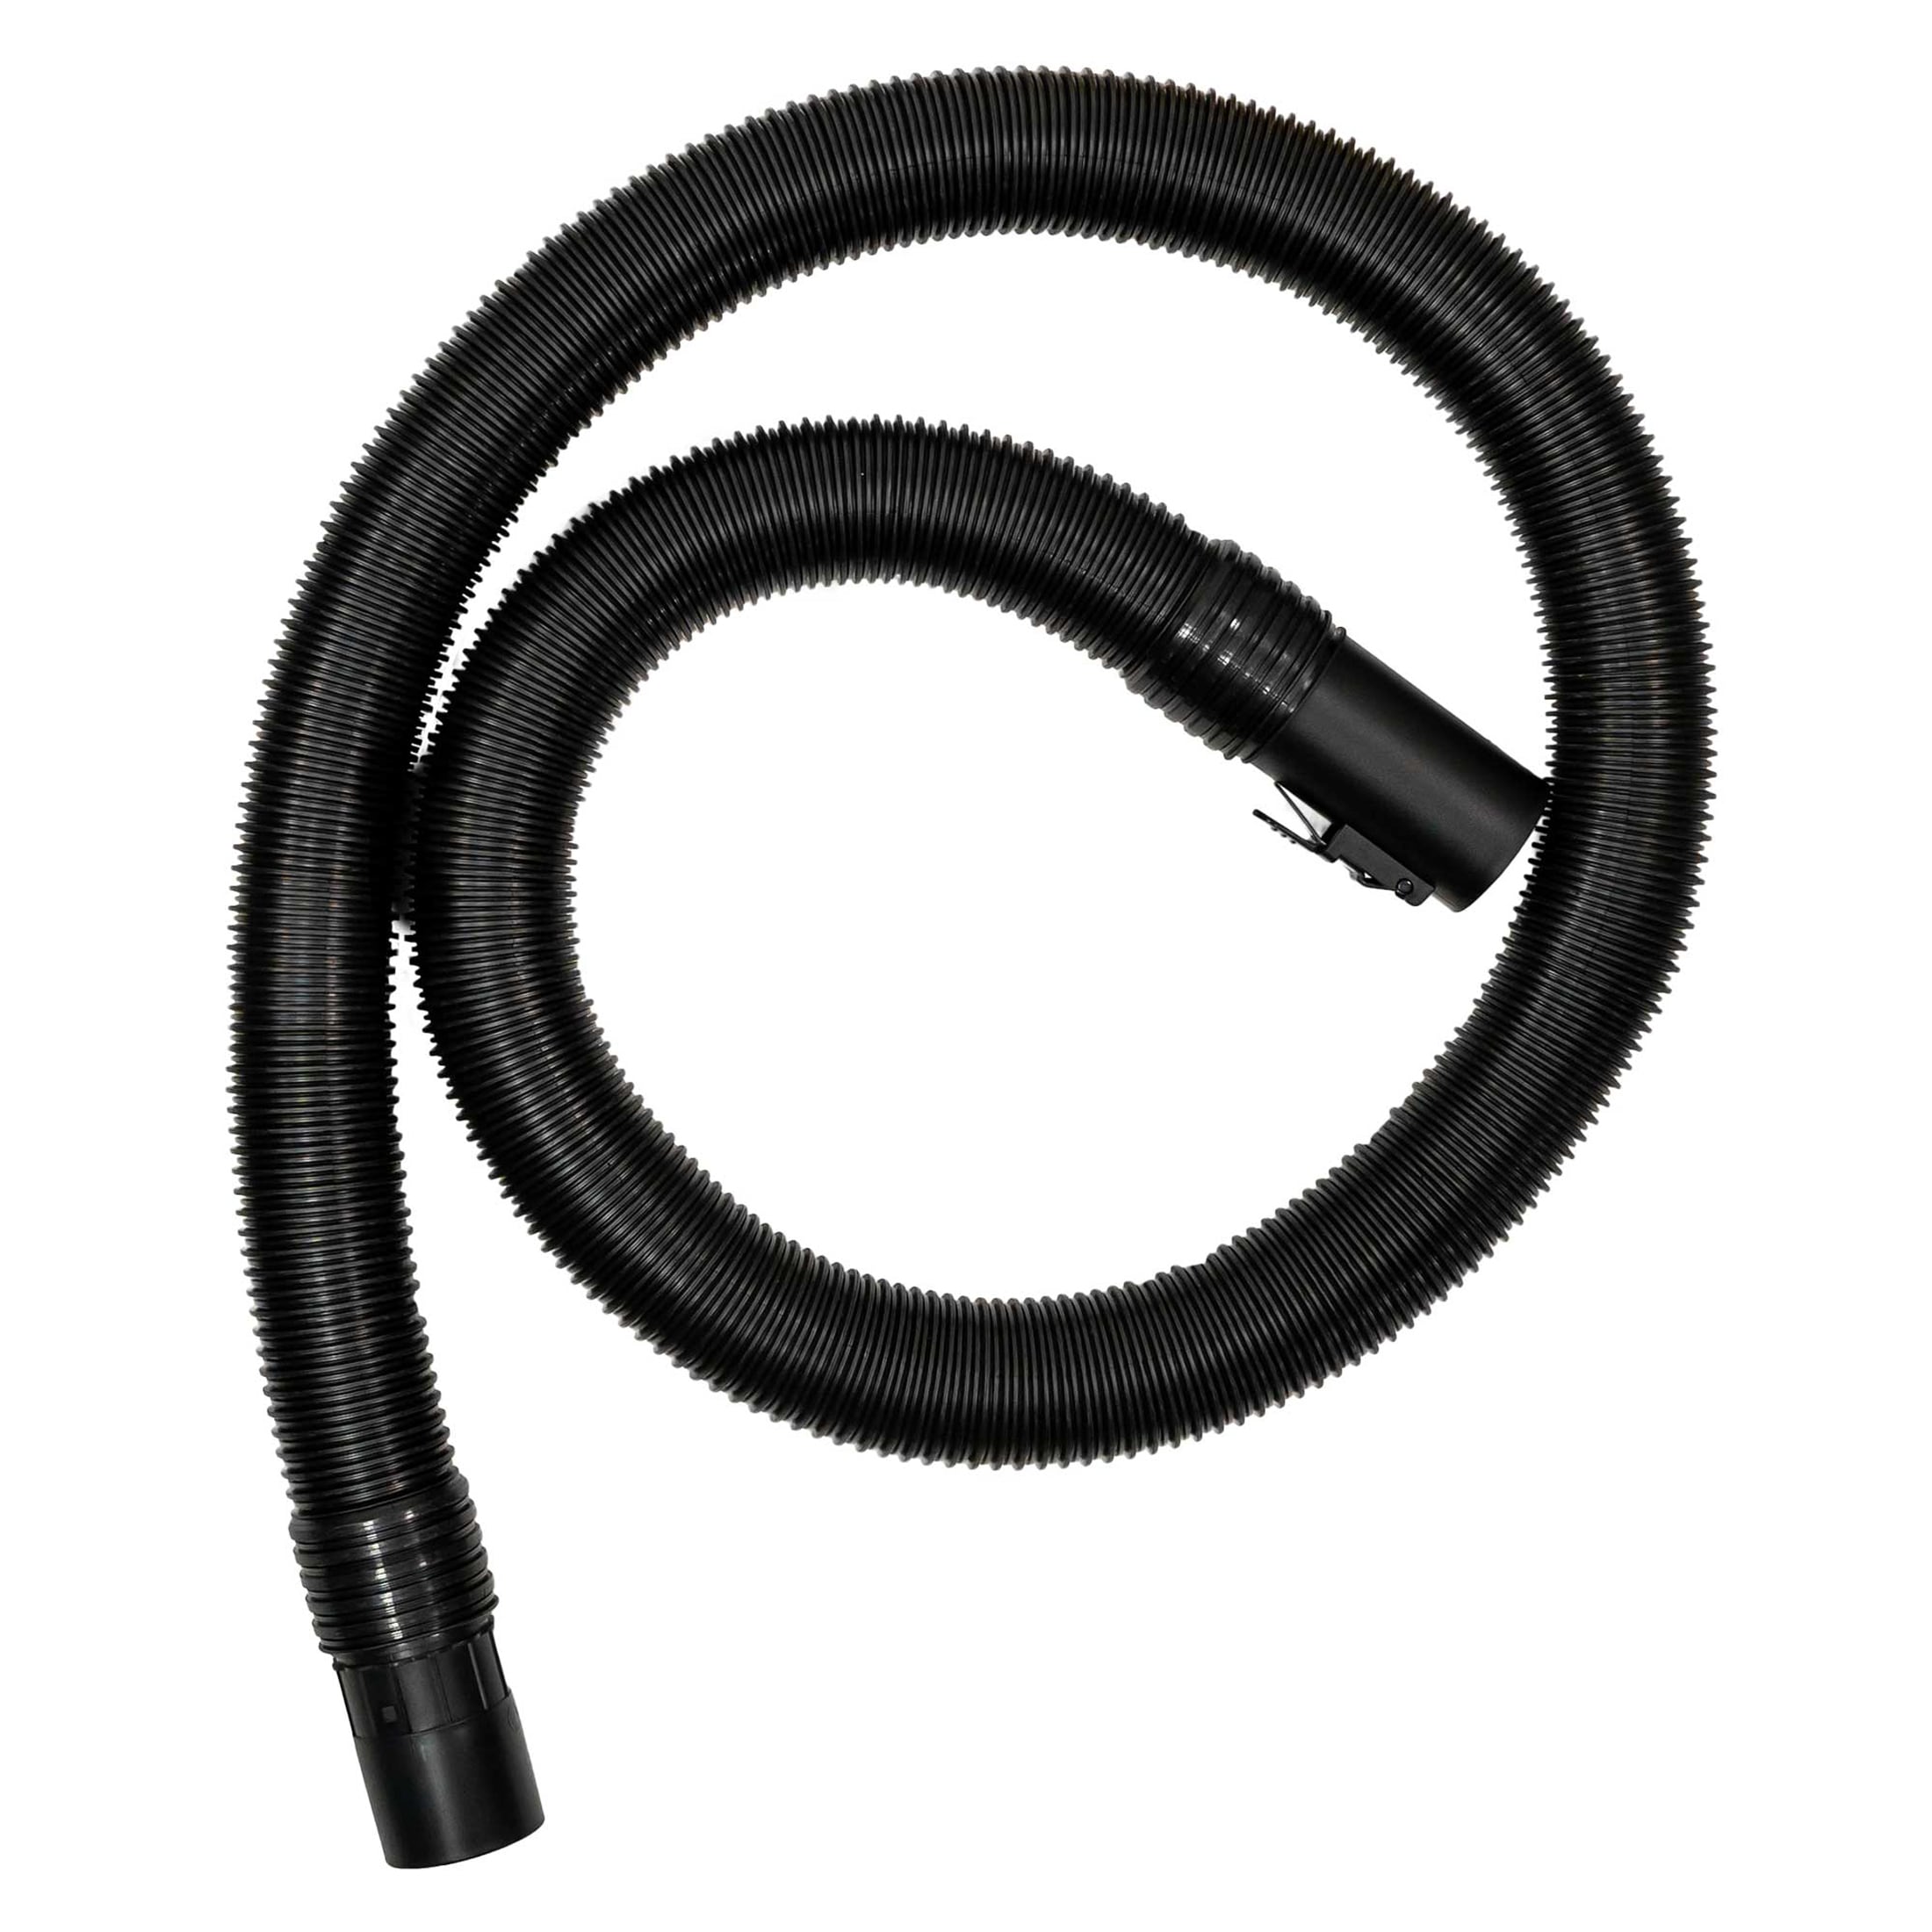 Shop-Vac® 8 foot X 1-1/4 inch diameter Hose with Long Extension End